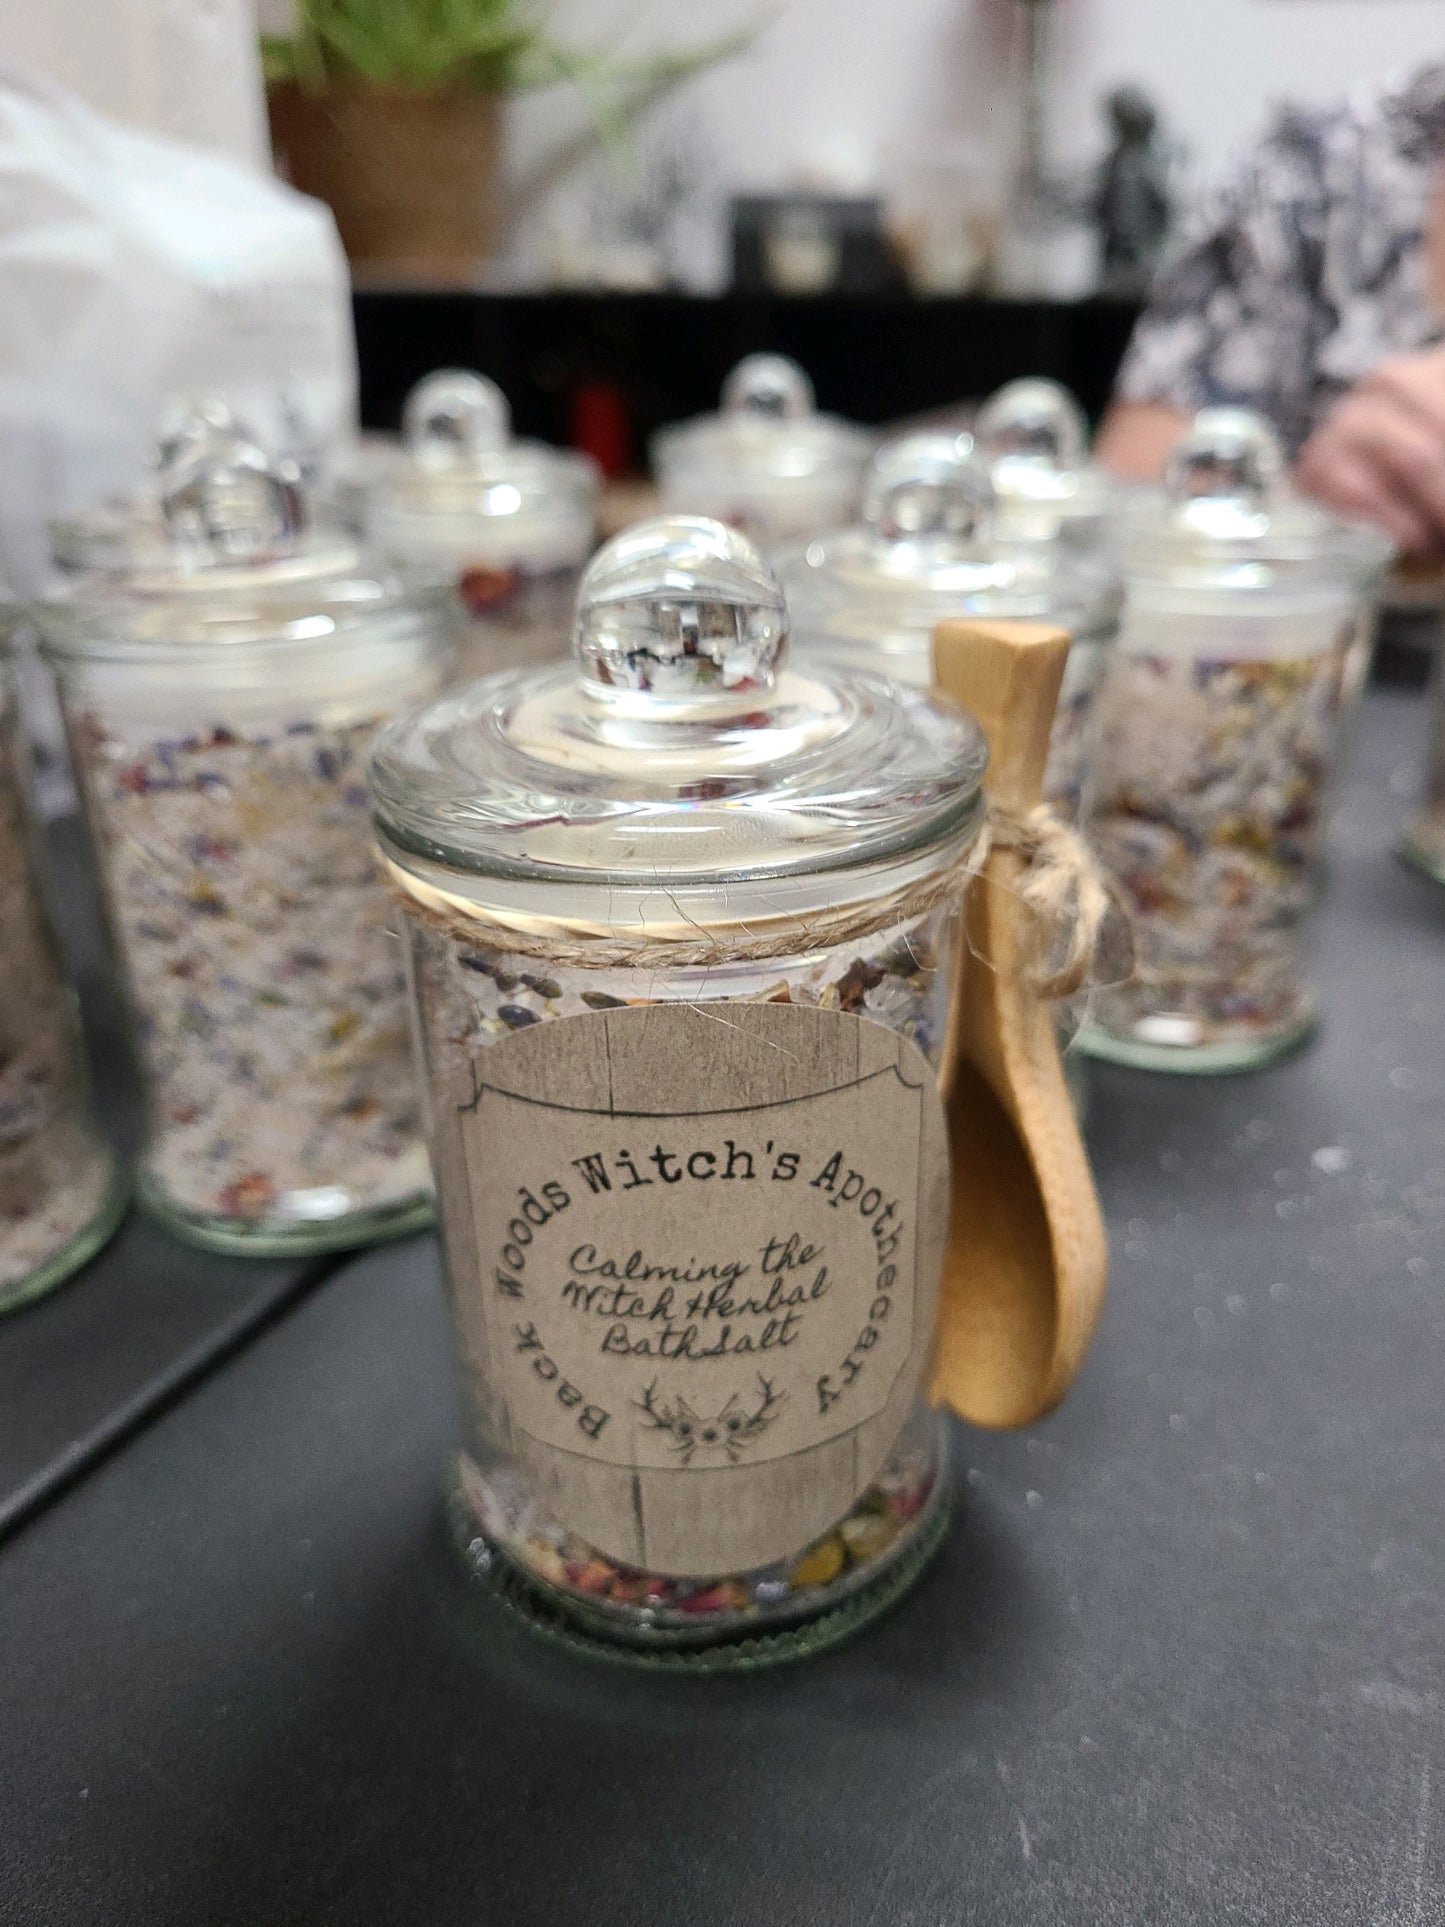 Back Wood Witch’s Apothecary - Calming the Witch Bath Salts